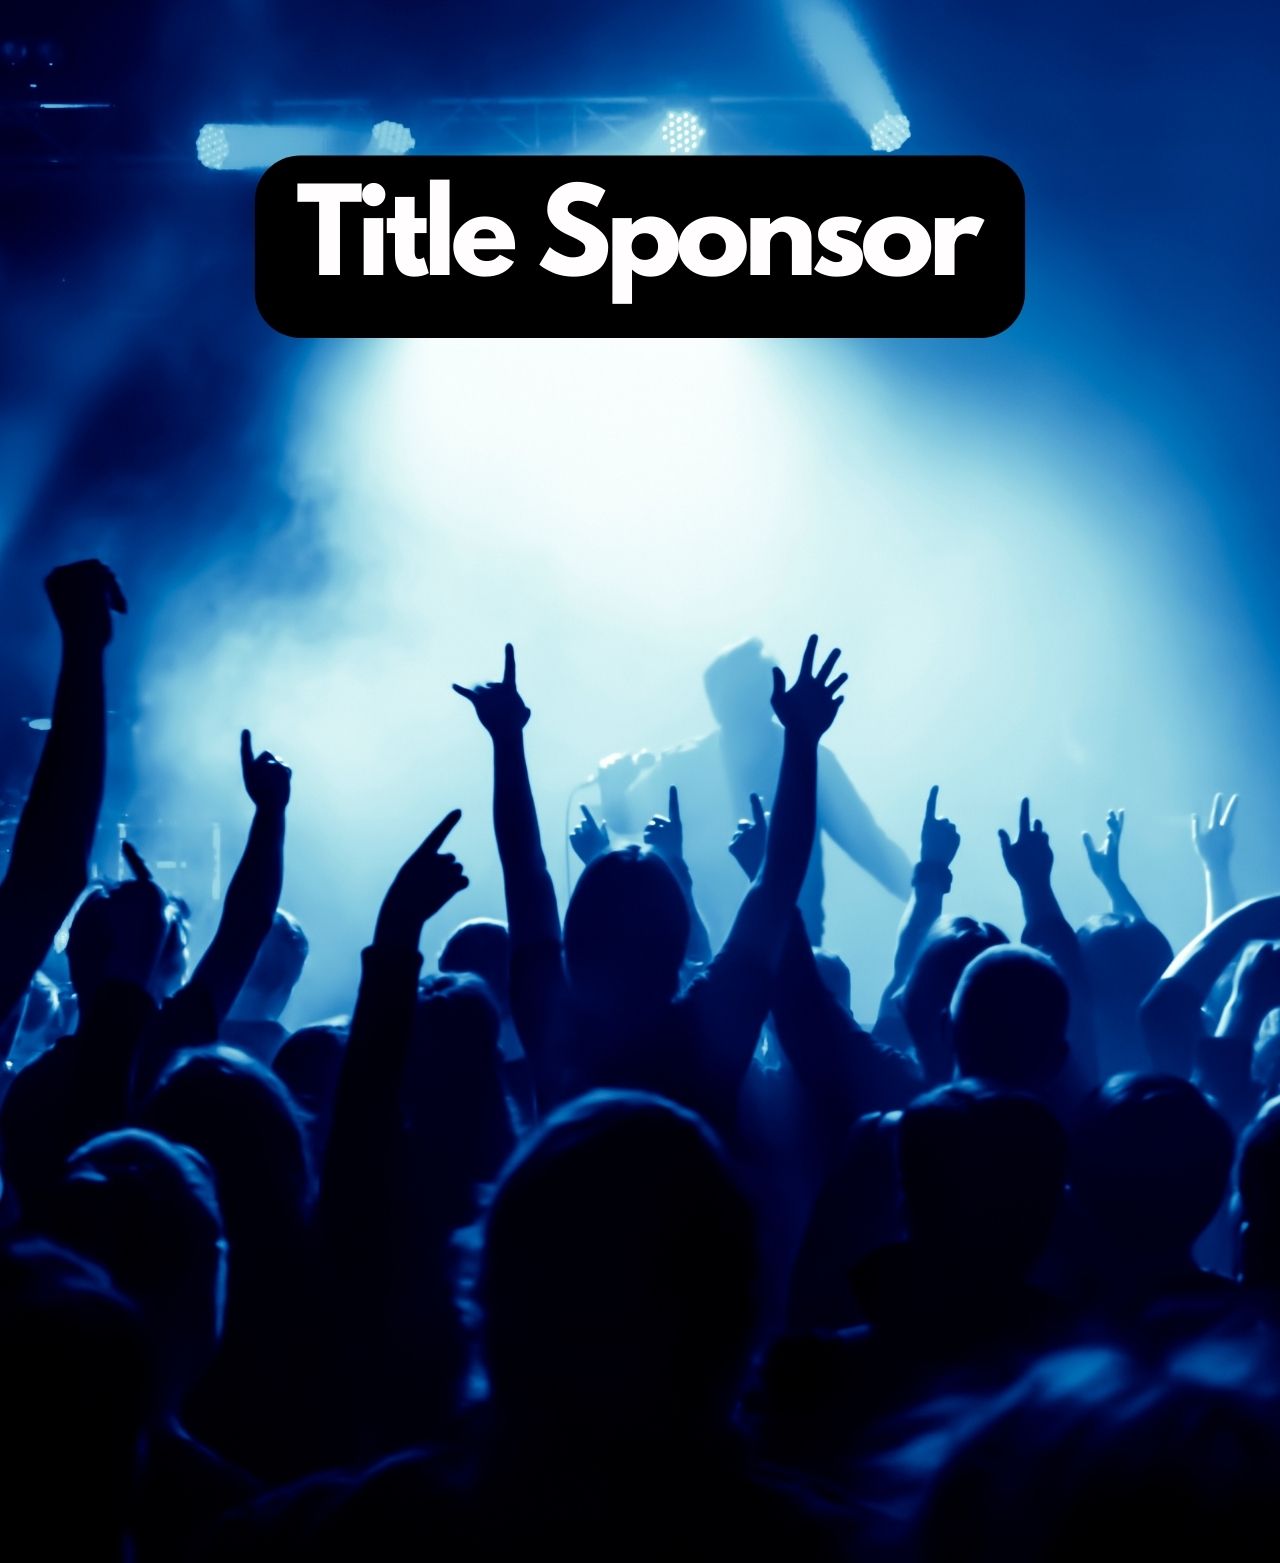 $50,000  •	Title Sponsor for June 24th concert performance by national recording artist  •	Banner posted on stage during concert performance. •	Opportunity to make remarks at the opening session on Saturday morning June 24 •	Video commercial during concert break •	Name on printed materials and video media  •	Breakout room with your name on it  •	30 priority seats for the Saturday concert •	Logo inclusion with hyperlink as Presenting Sponsor on event website •	Name on all program materials •	50 T-shirts